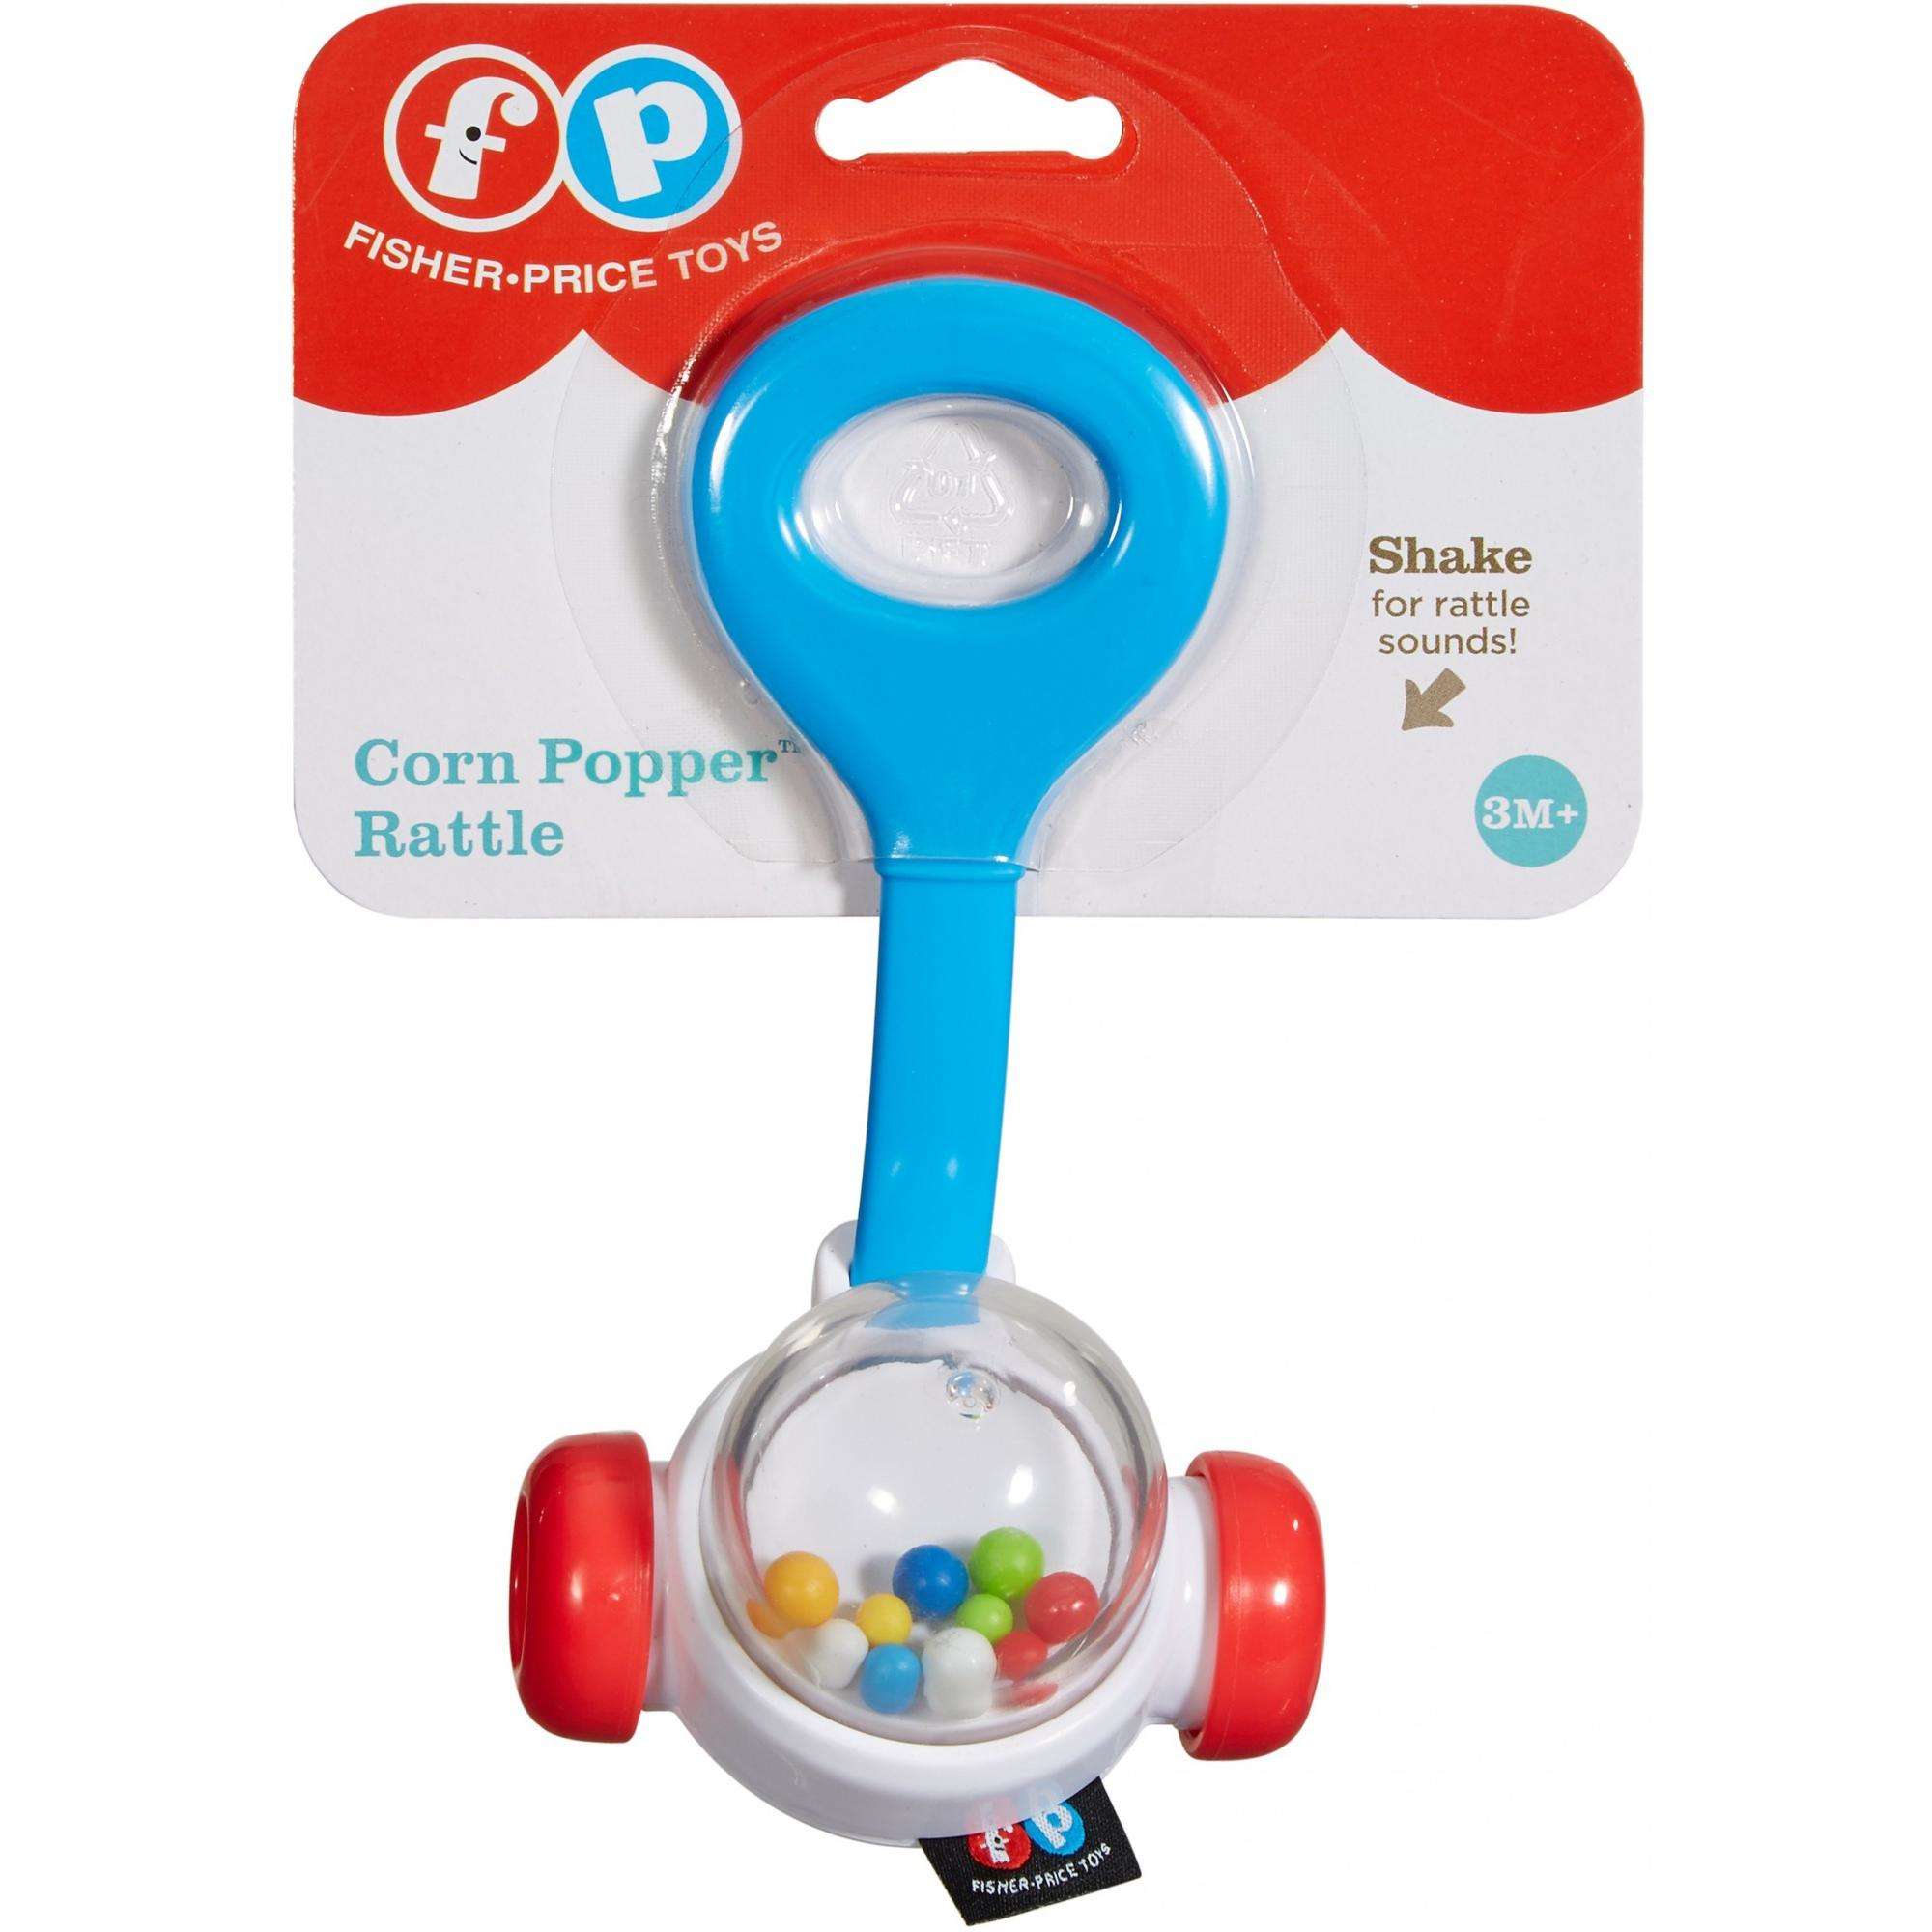 Fisher-Price Corn Popper Rattle - image 5 of 6